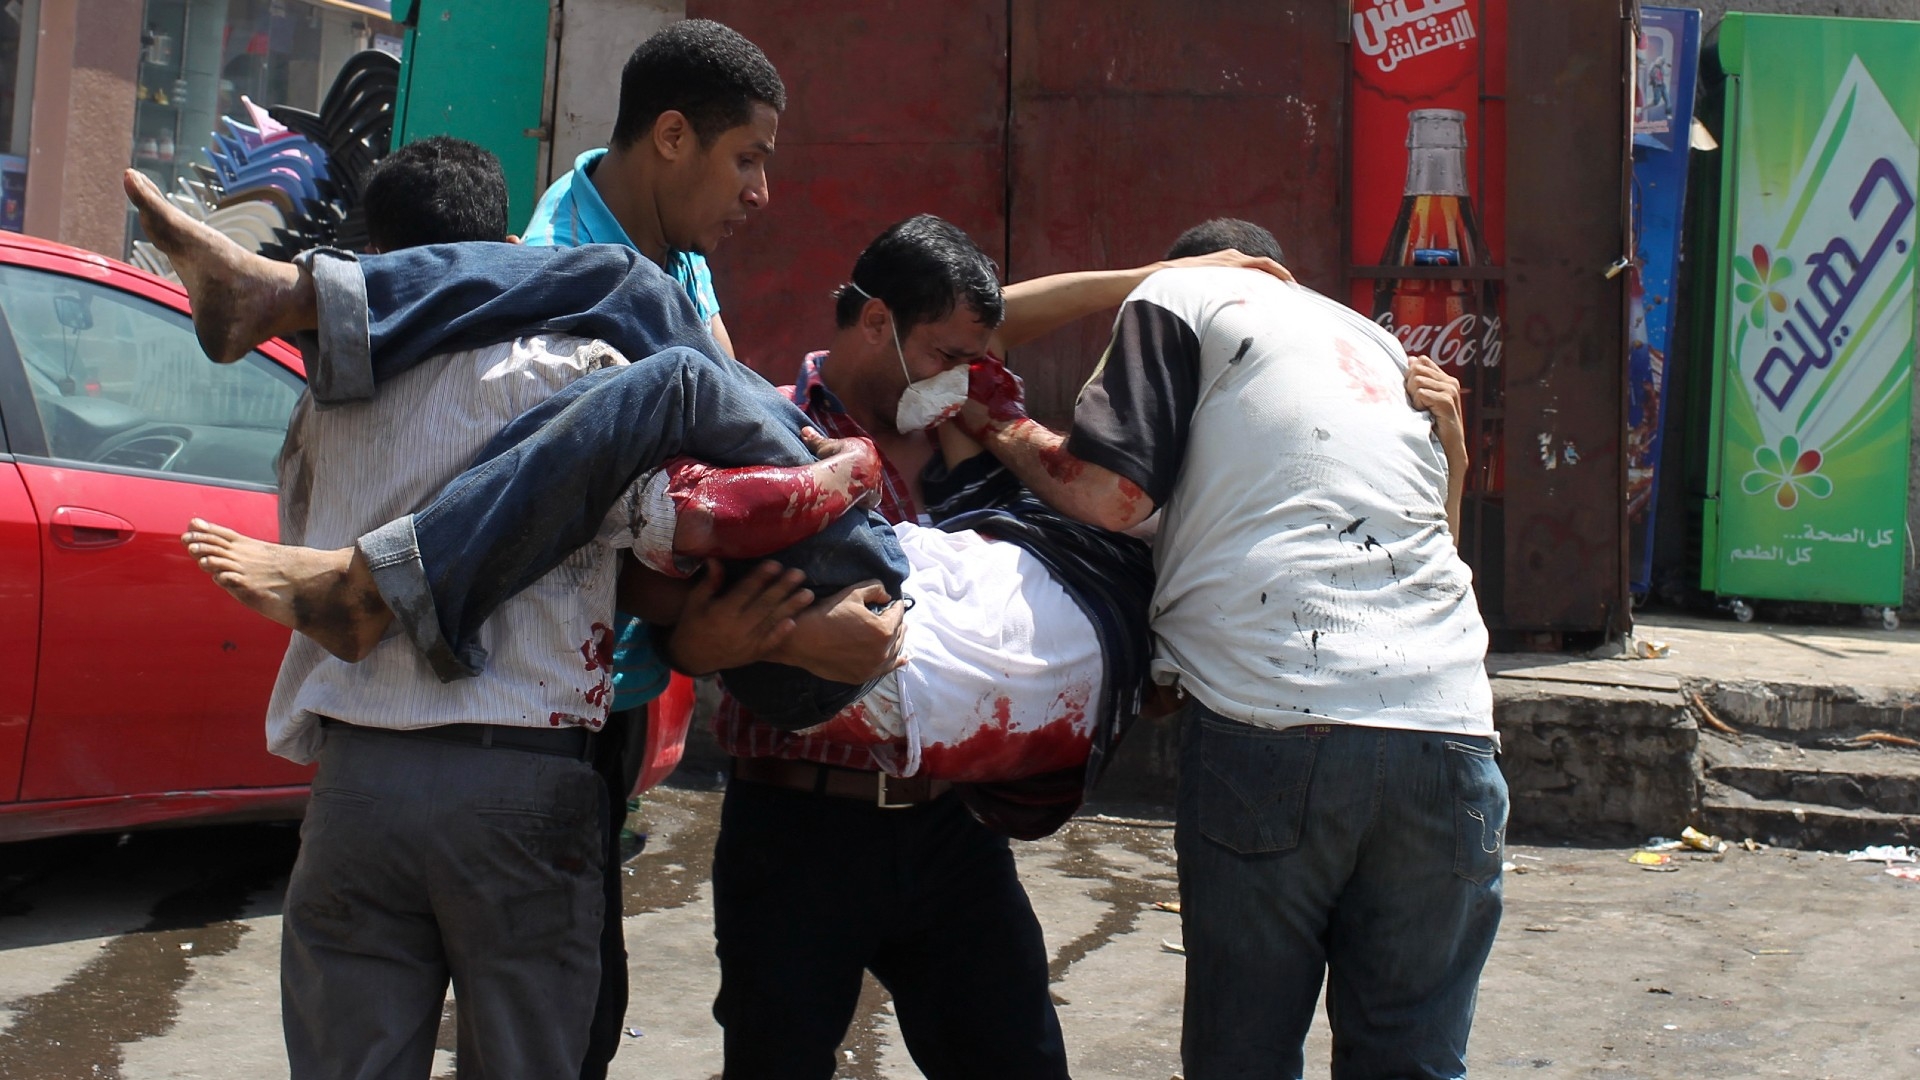 Supporters of deposed Egyptian President Mohamed Morsi carry a protester wounded by security forces in the area of Rabaa al-Adawiya square, where they are camping, in Cairo (Reuters)